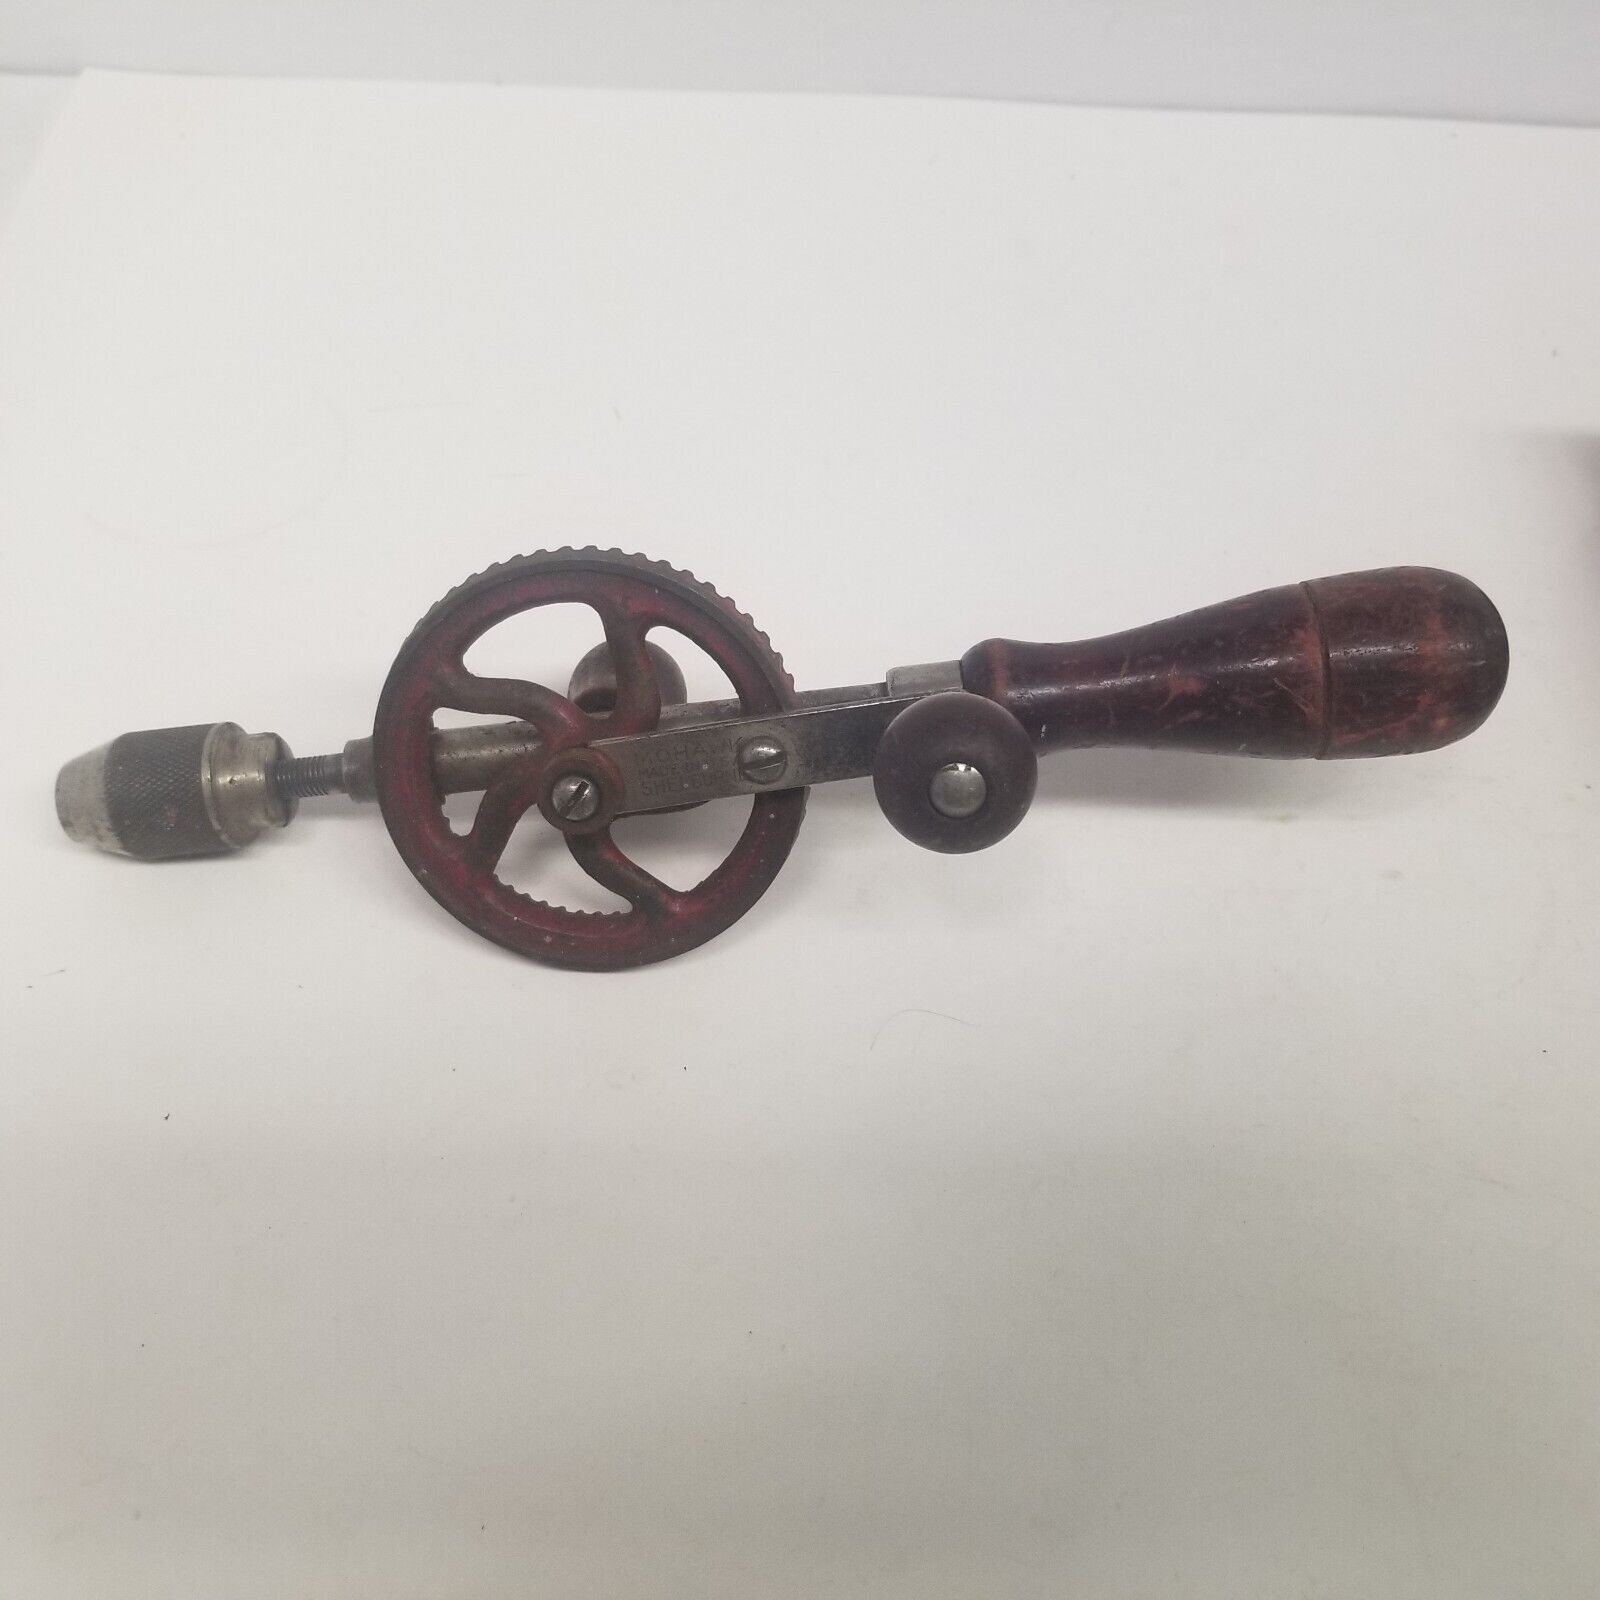 Vintage Mohawk Brand Egg Beater Style Hand Drill, Turns Freely, Chuck Opens